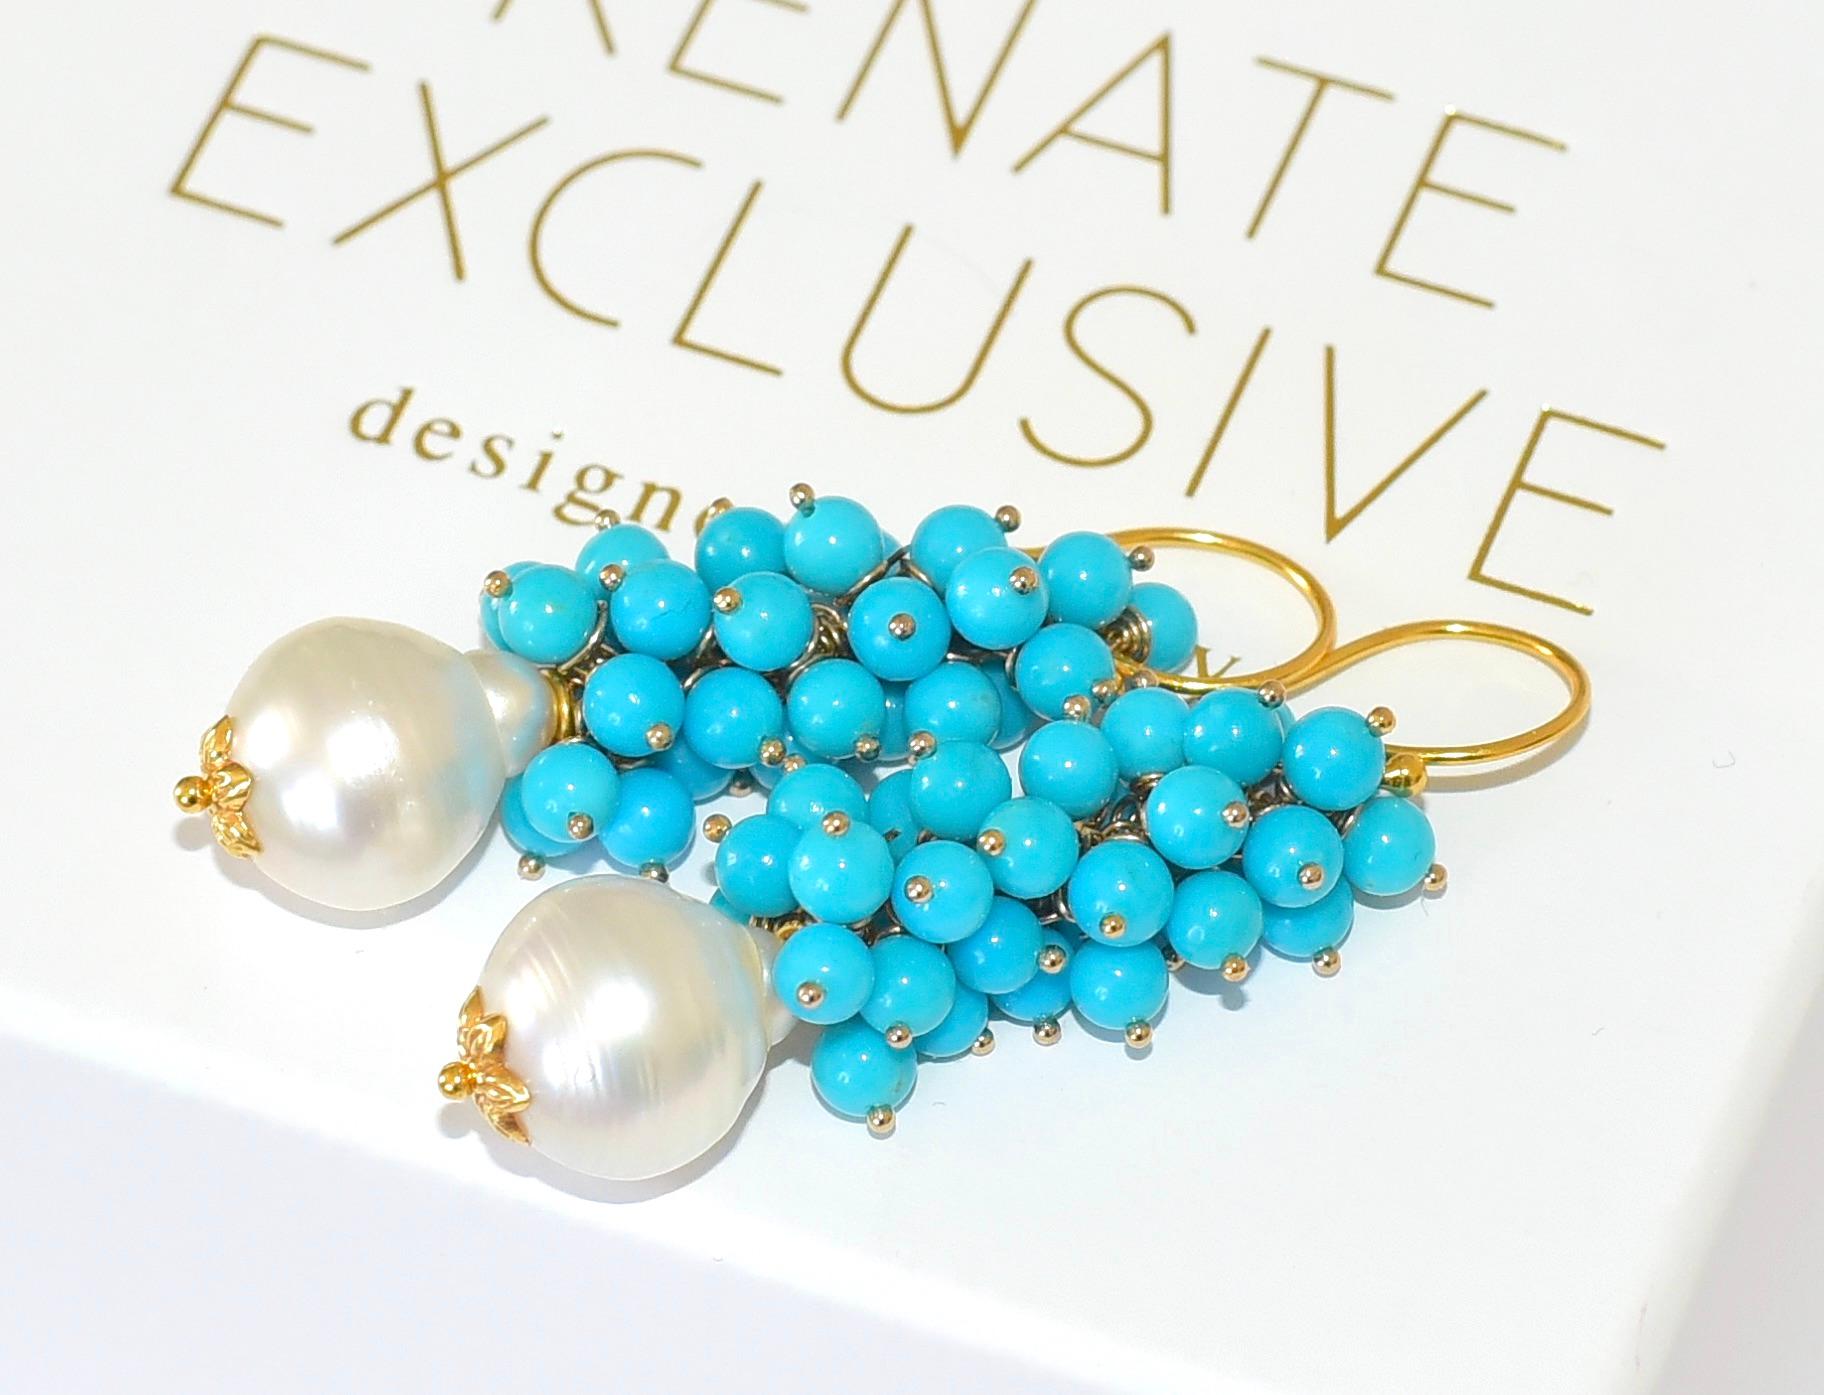 Bead Sleeping Beauty Turquoise, South Sea Baroque Pearl Earrings in 18K Solid Gold